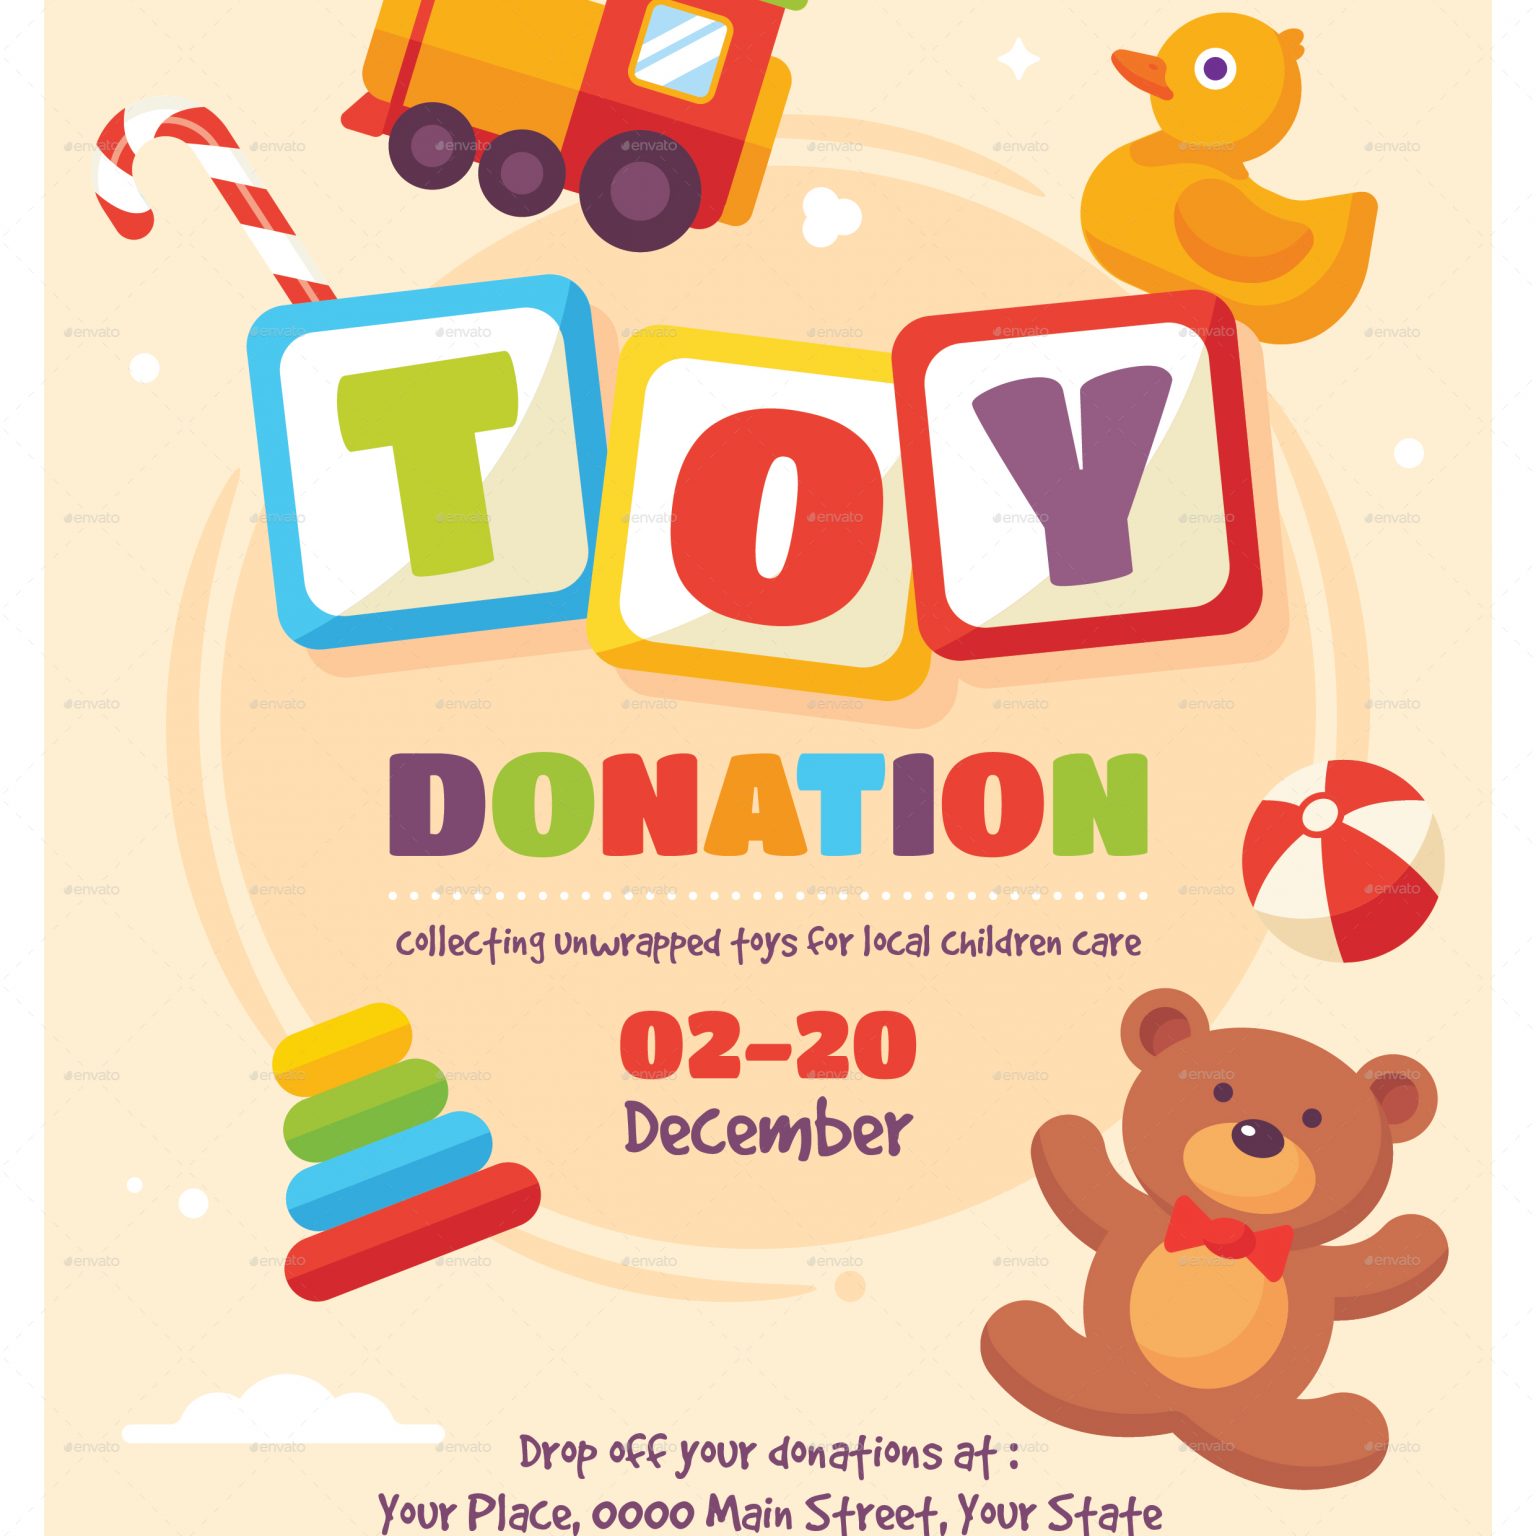 Toys for Tots Donation Flyer Free (10 Wonderful Picks)